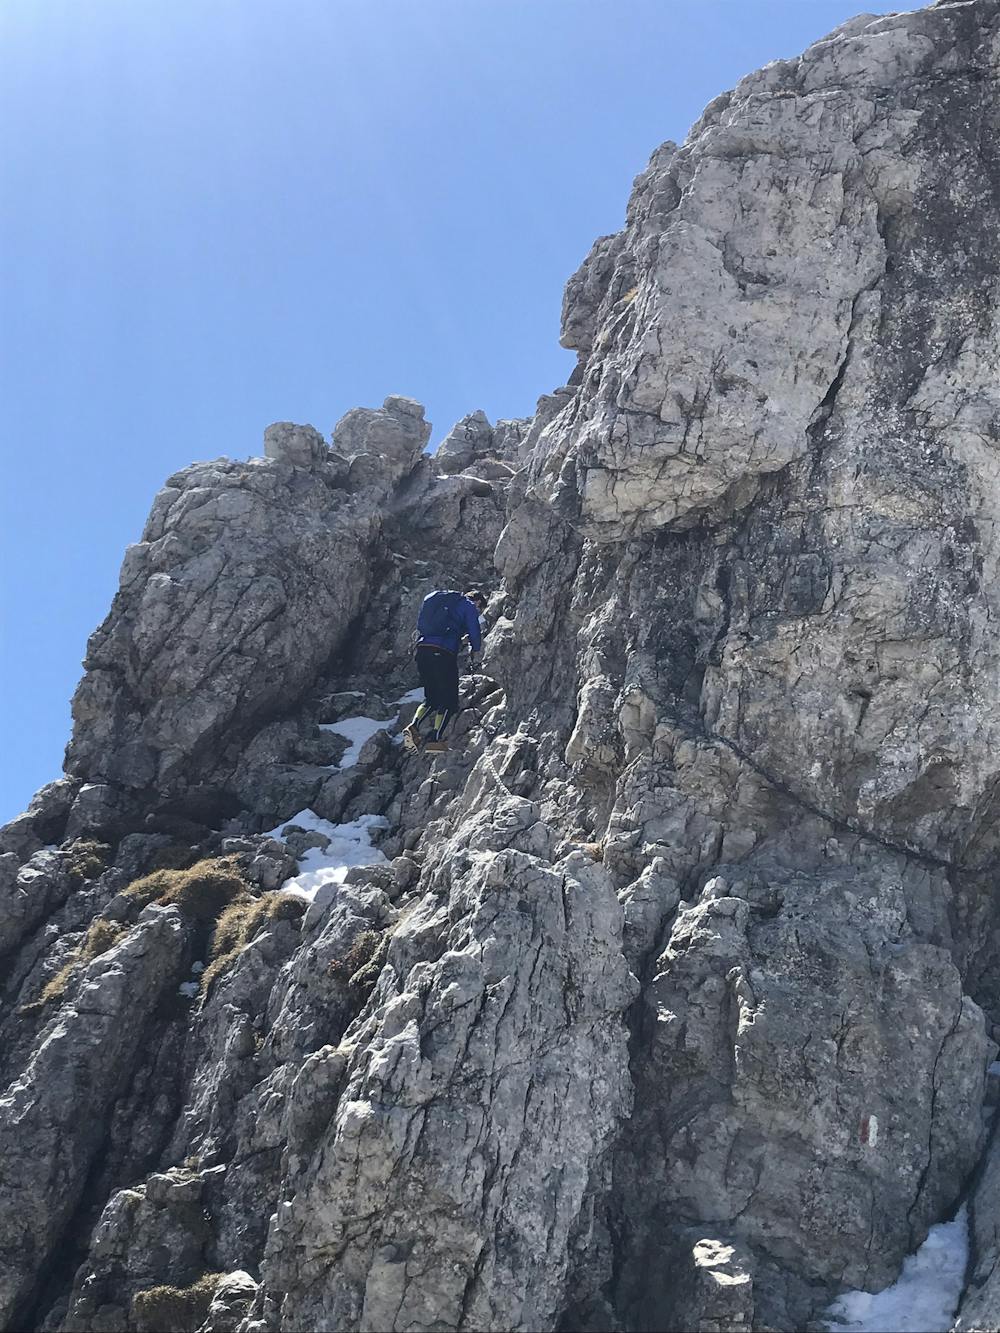 traits equipped with chains descending the summit of the Grigna Meridionale